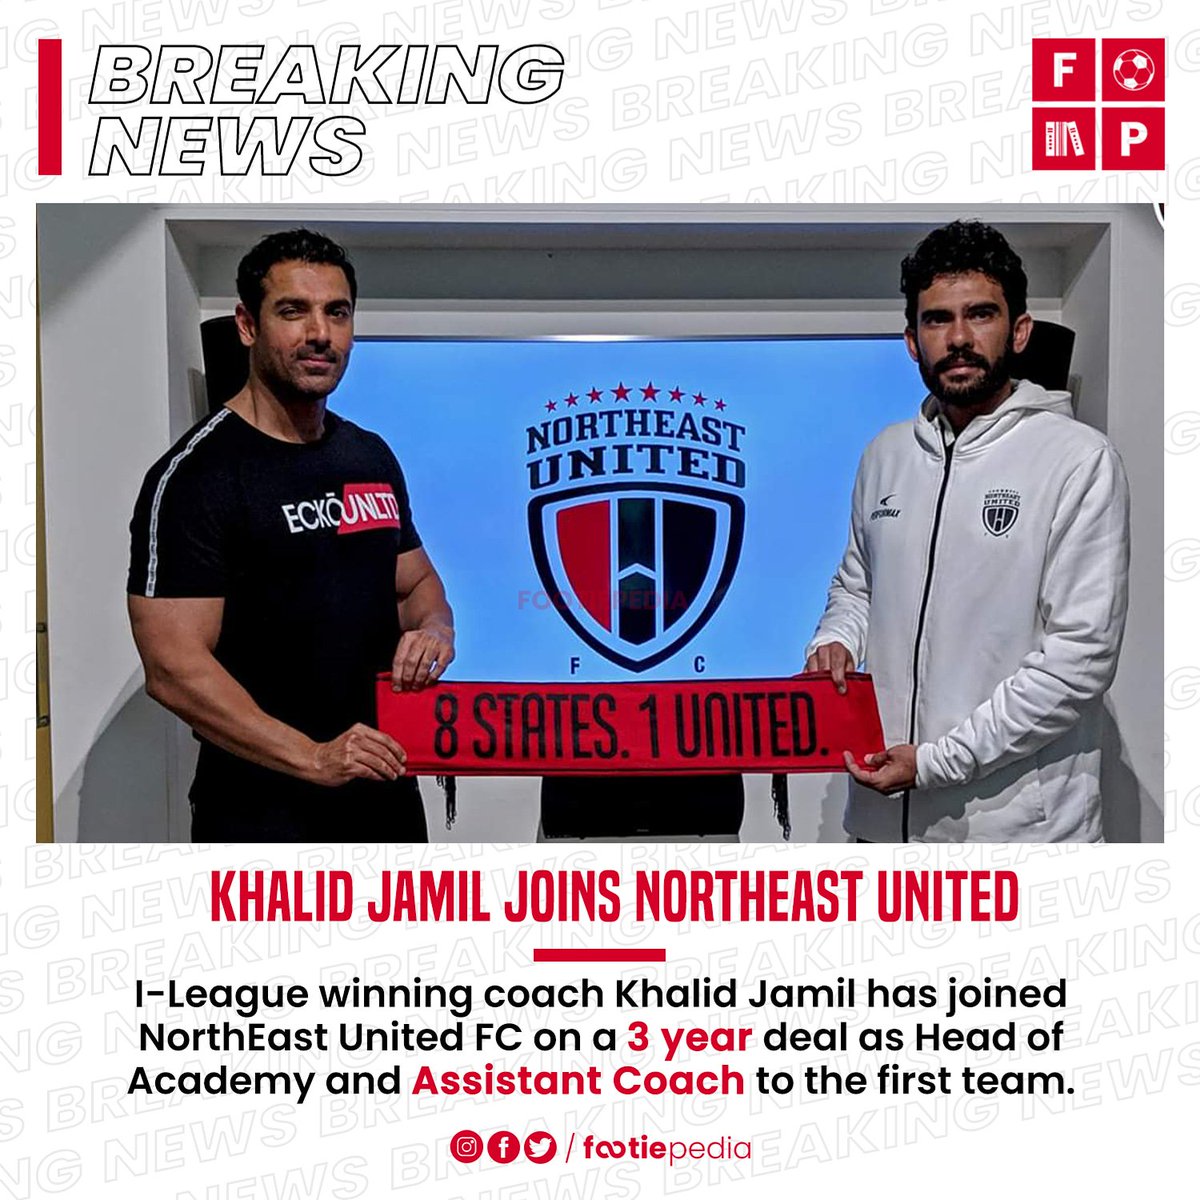 Khalid Jamil has joined the Highlanders on a 3 year contract.💥
#IndianFootball #8States1United #StrongerTogether https://t.co/D61dLsnMMh.